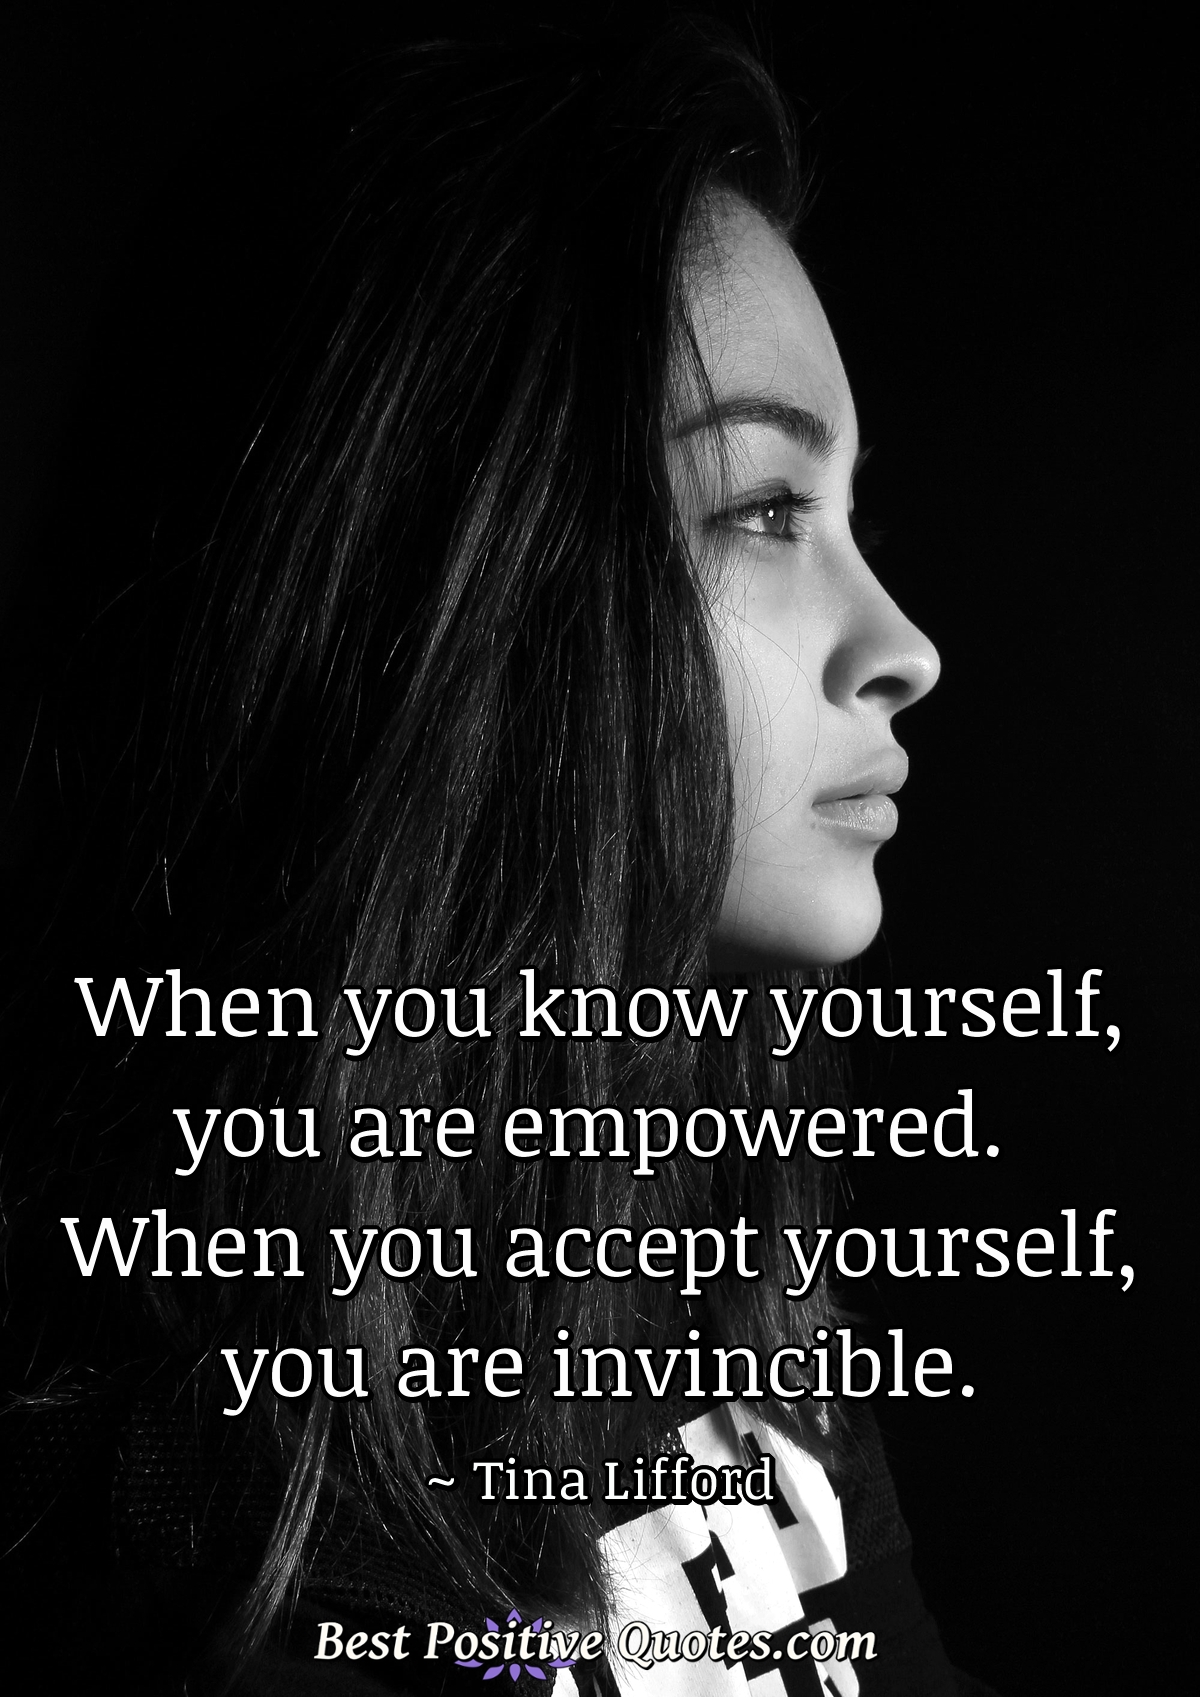 245 Knowing Your Worth Quotes To Empower You